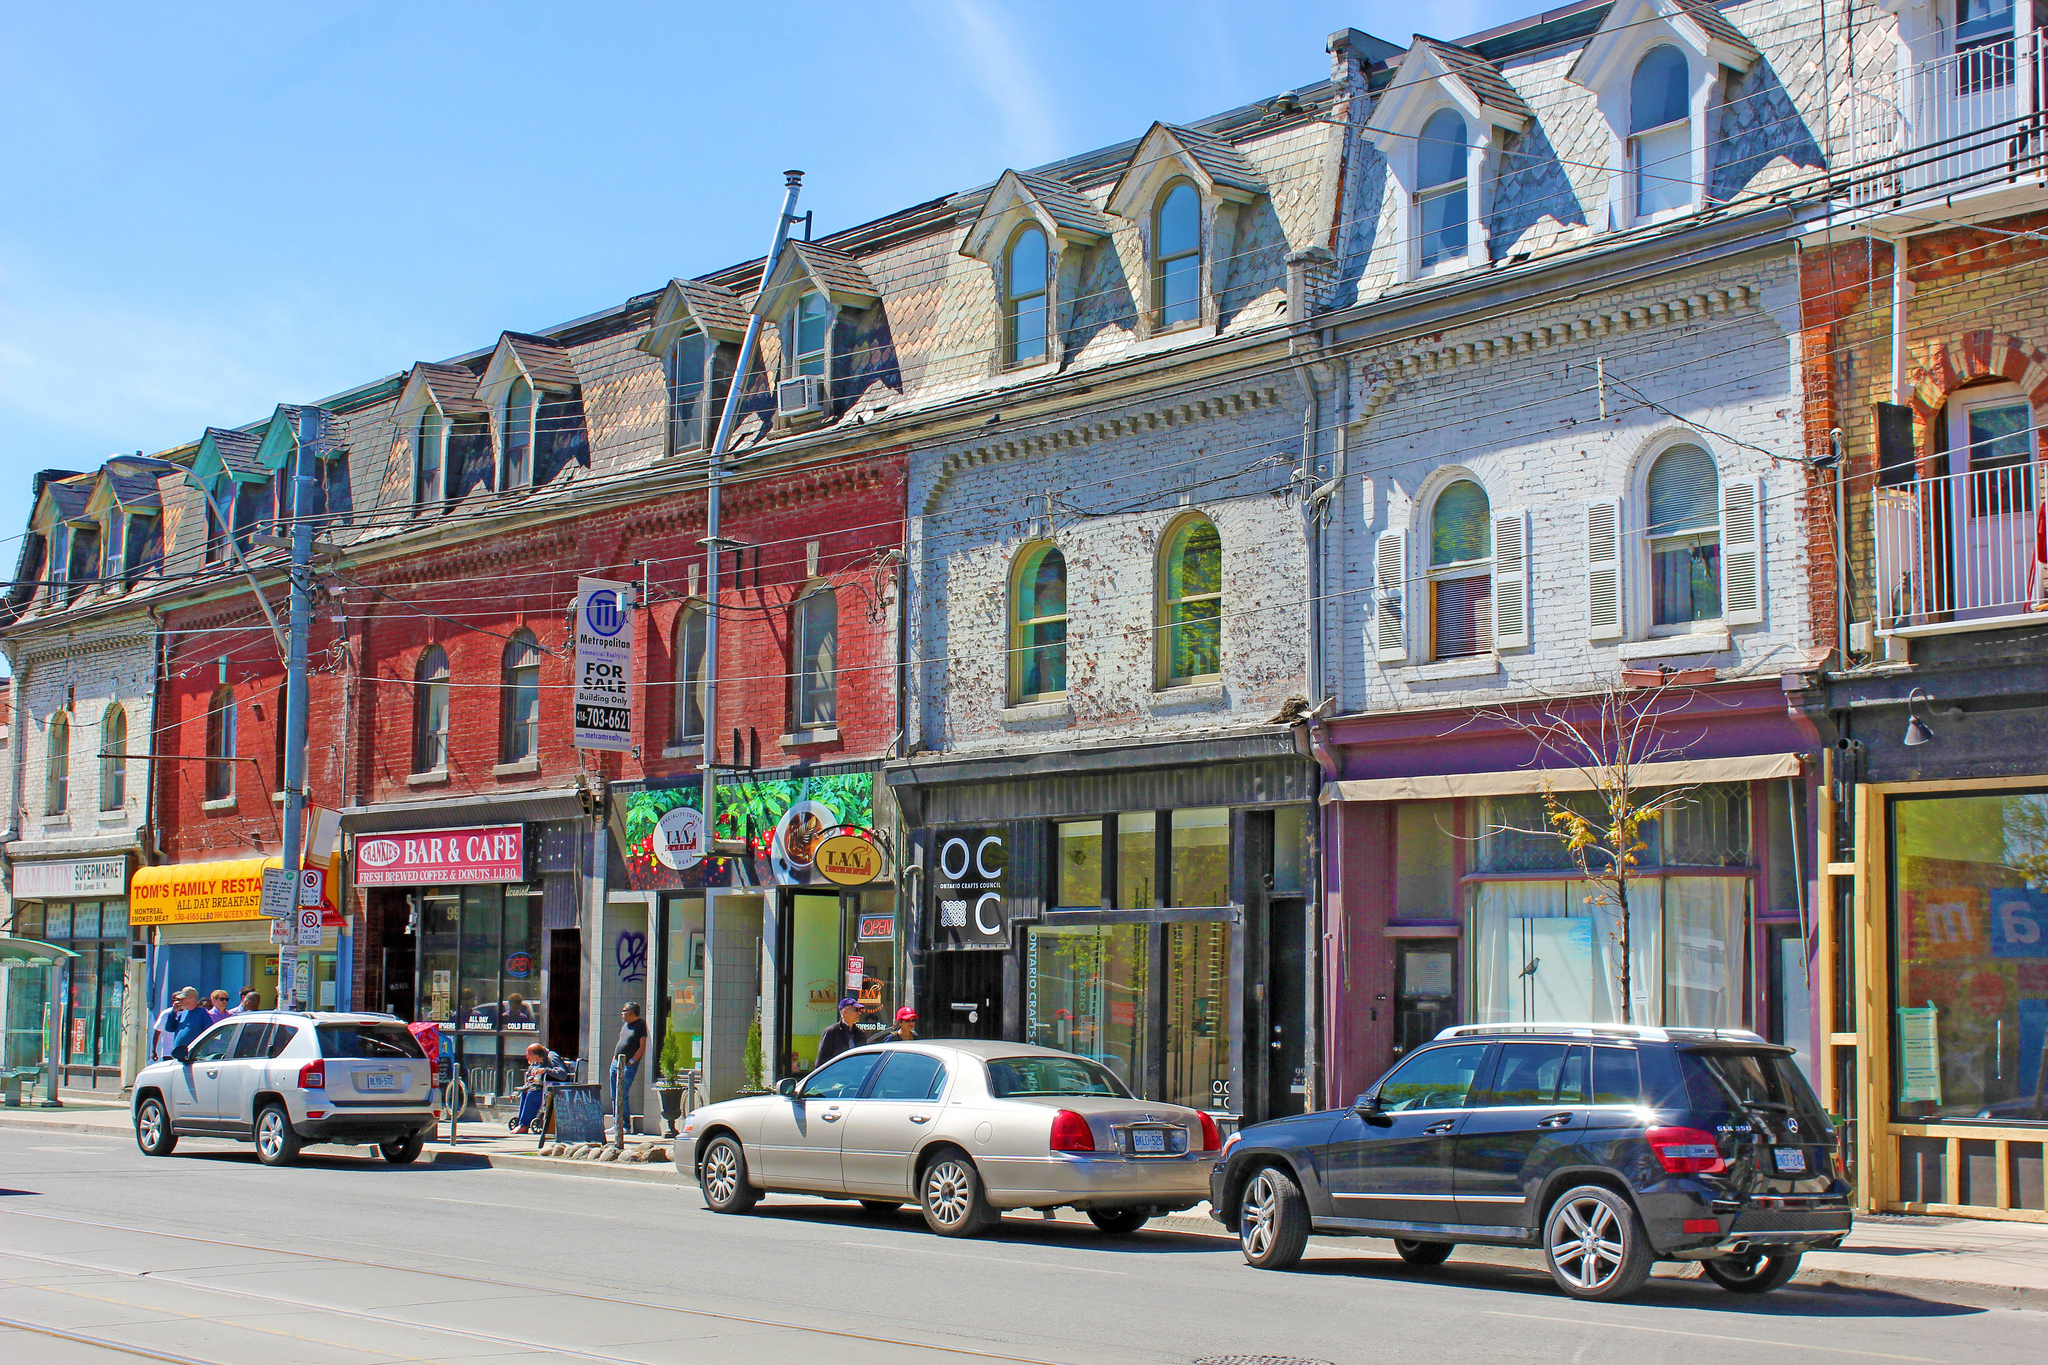 Queen West has a much bolder vibe than King West (Image Credit: Don Gunn, Flickr).